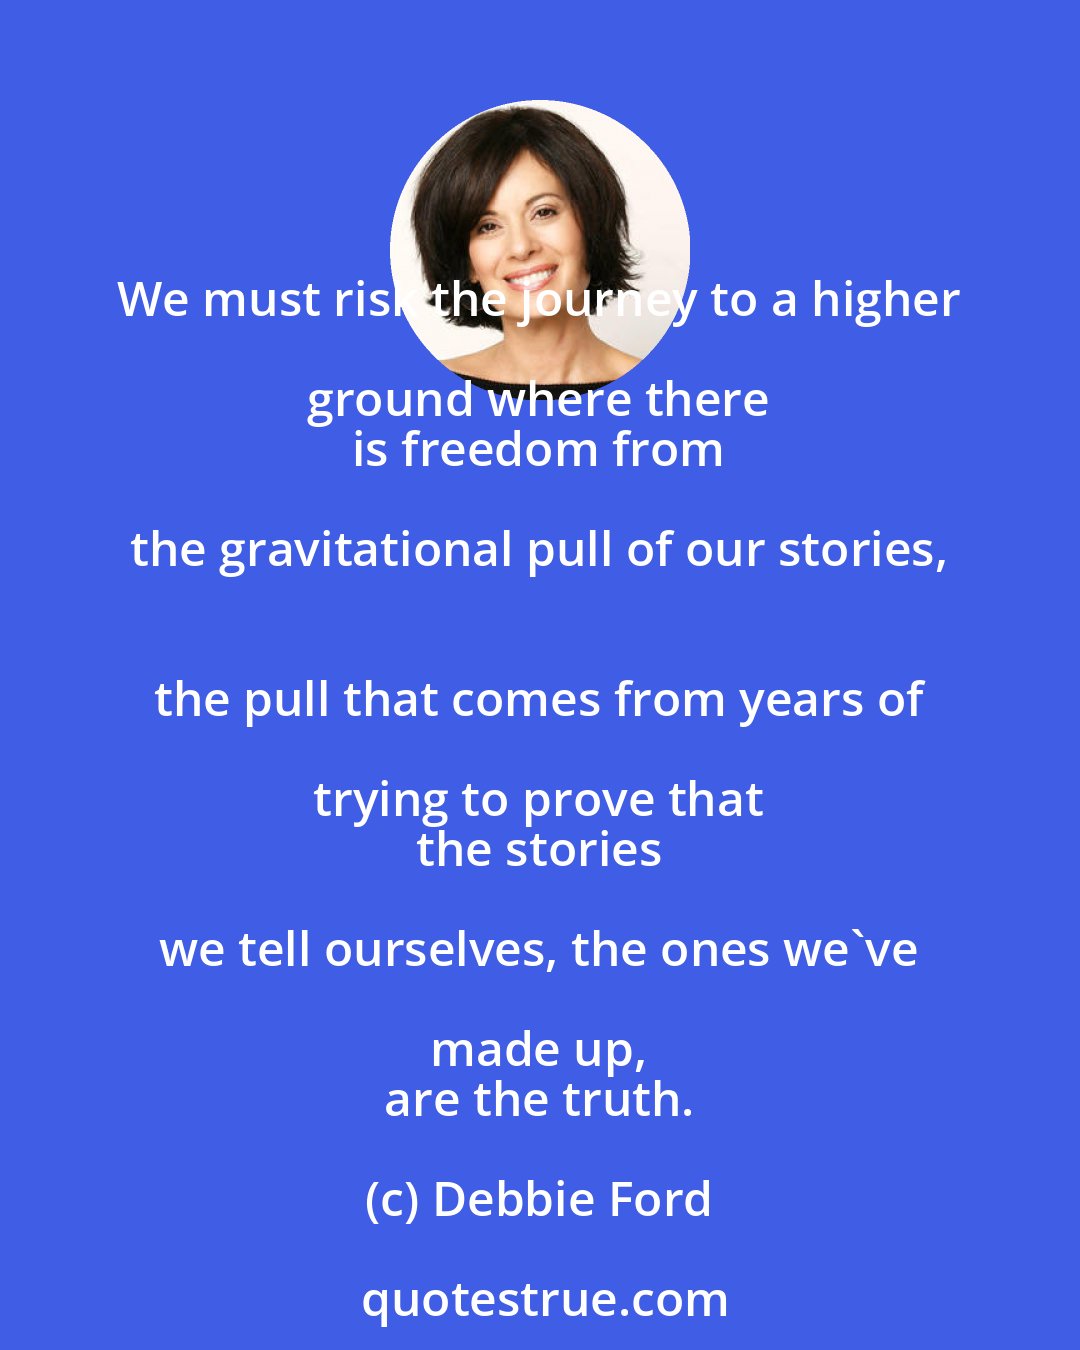 Debbie Ford: We must risk the journey to a higher ground where there 
 is freedom from the gravitational pull of our stories, 
 the pull that comes from years of trying to prove that 
 the stories we tell ourselves, the ones we've made up, 
 are the truth.